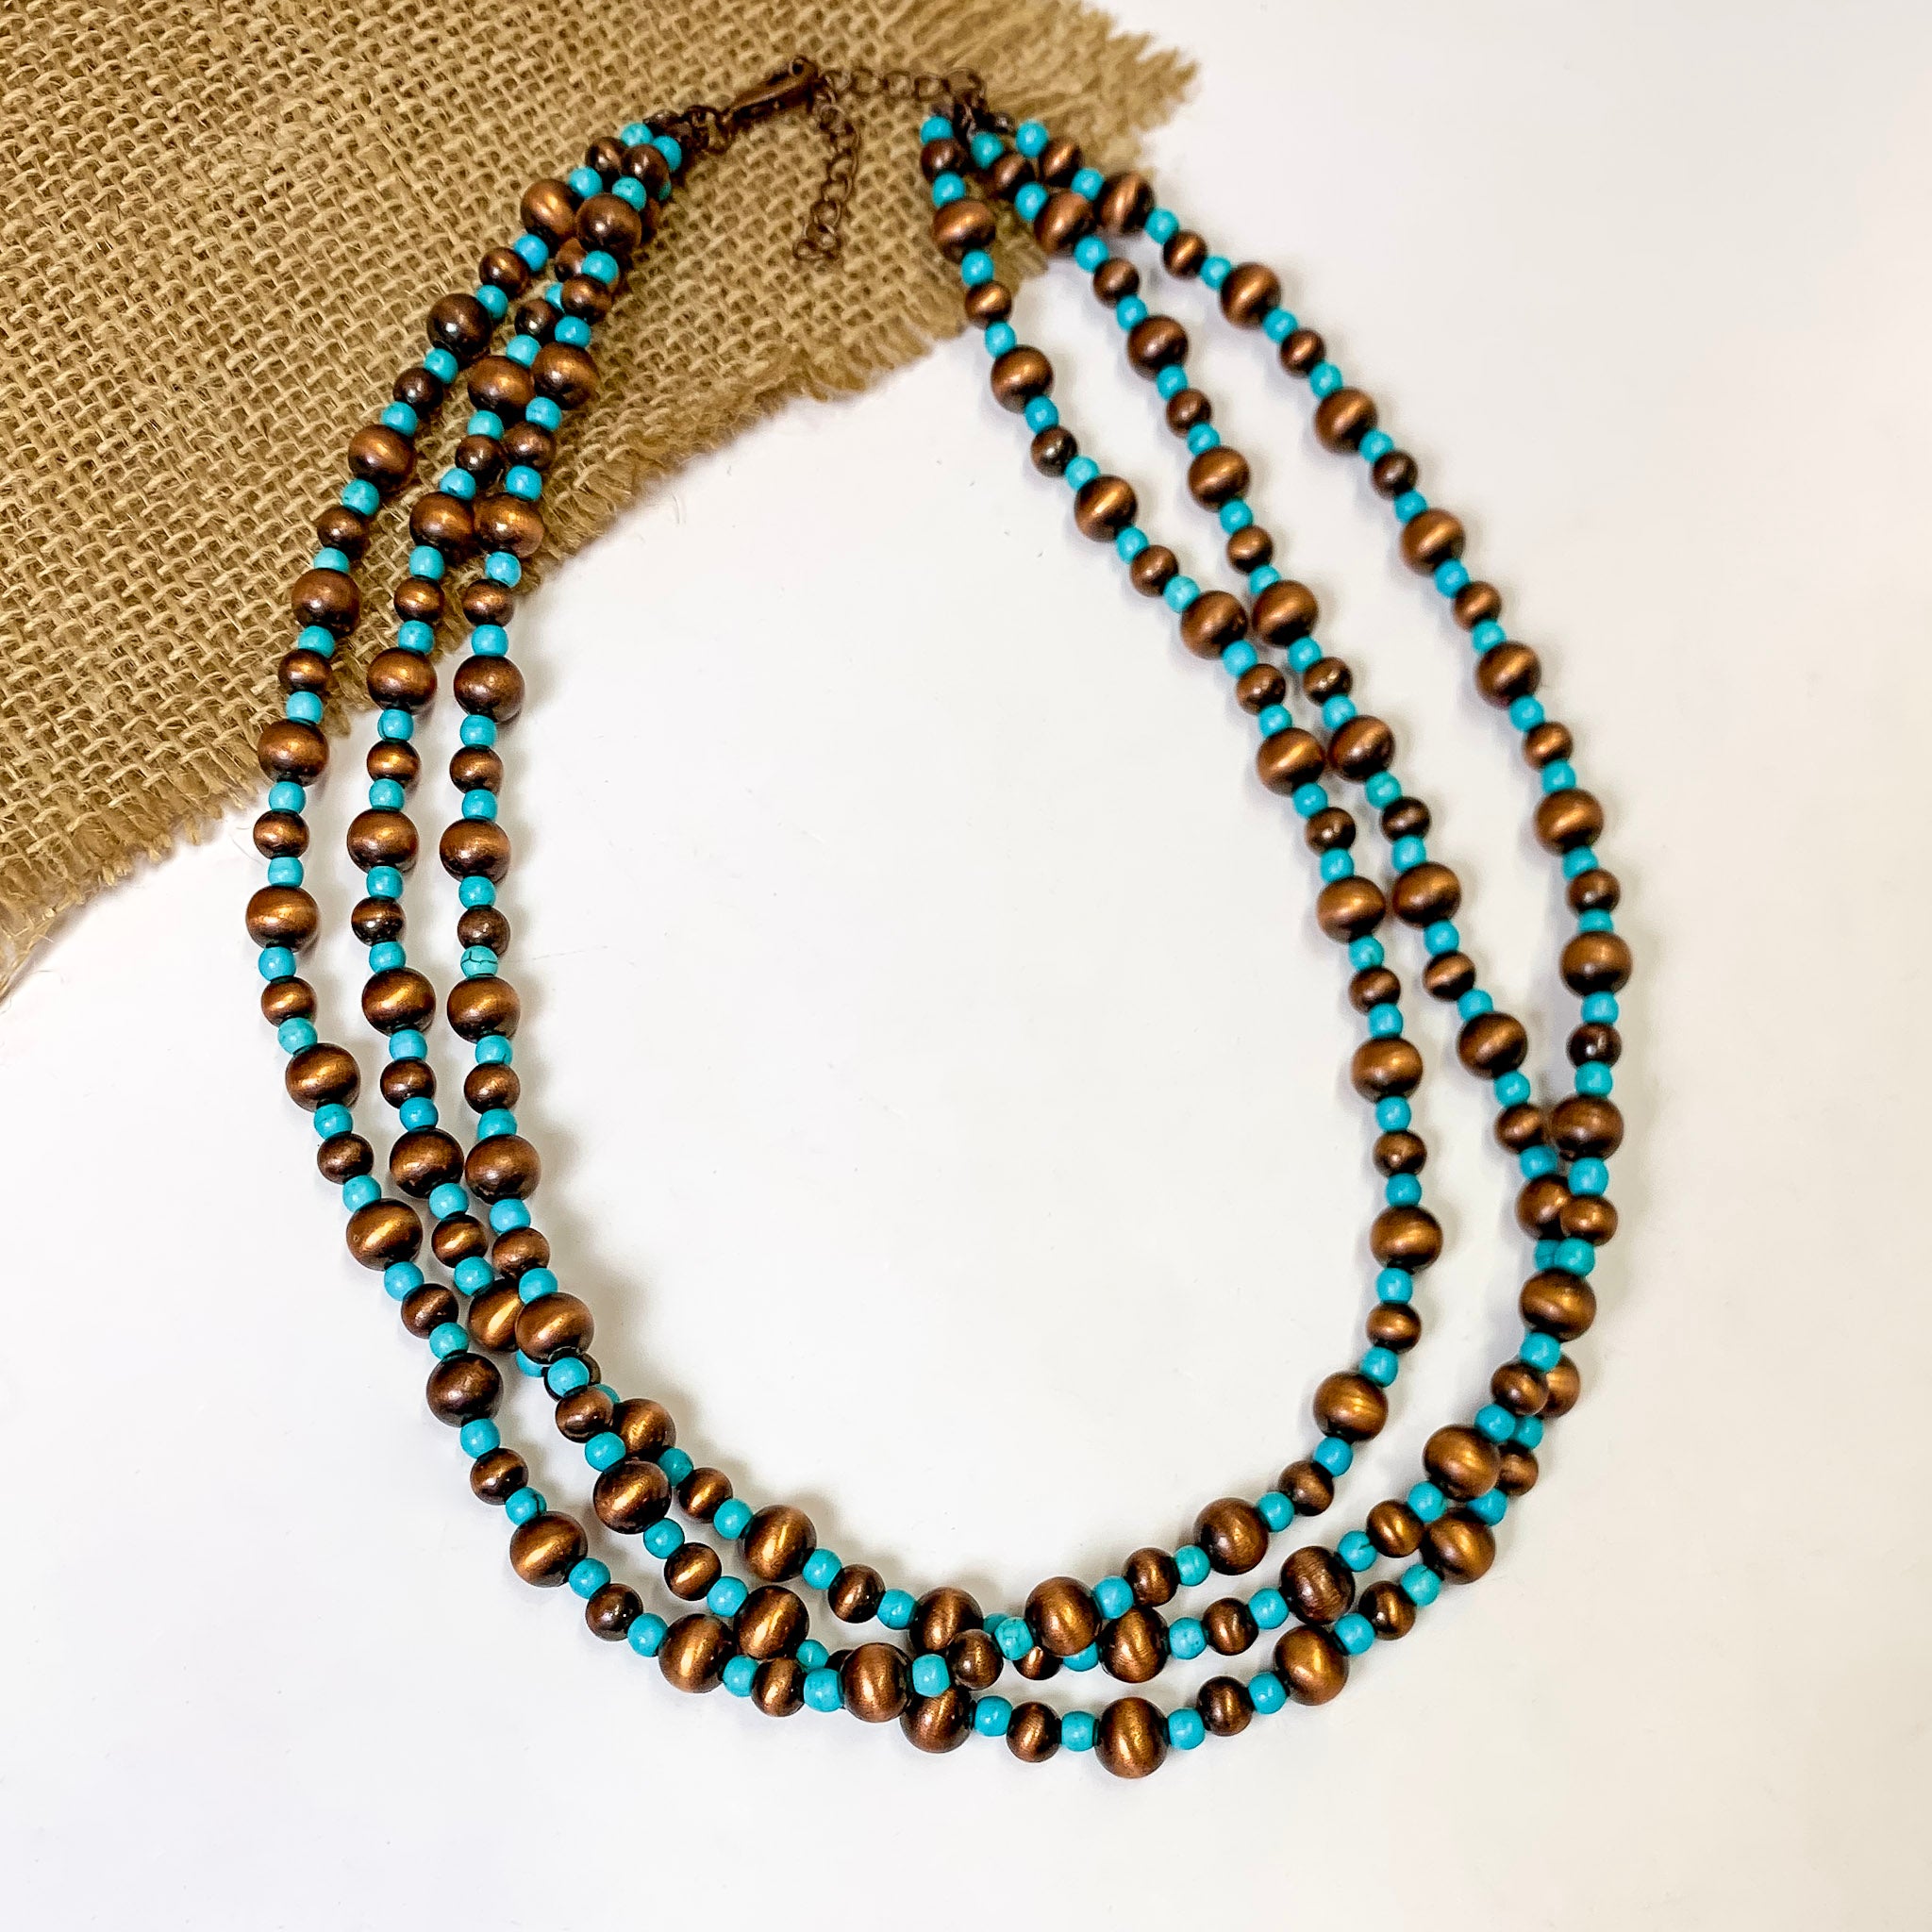 3 Strand Copper Tone Pearl Necklace With Turquoise Beads